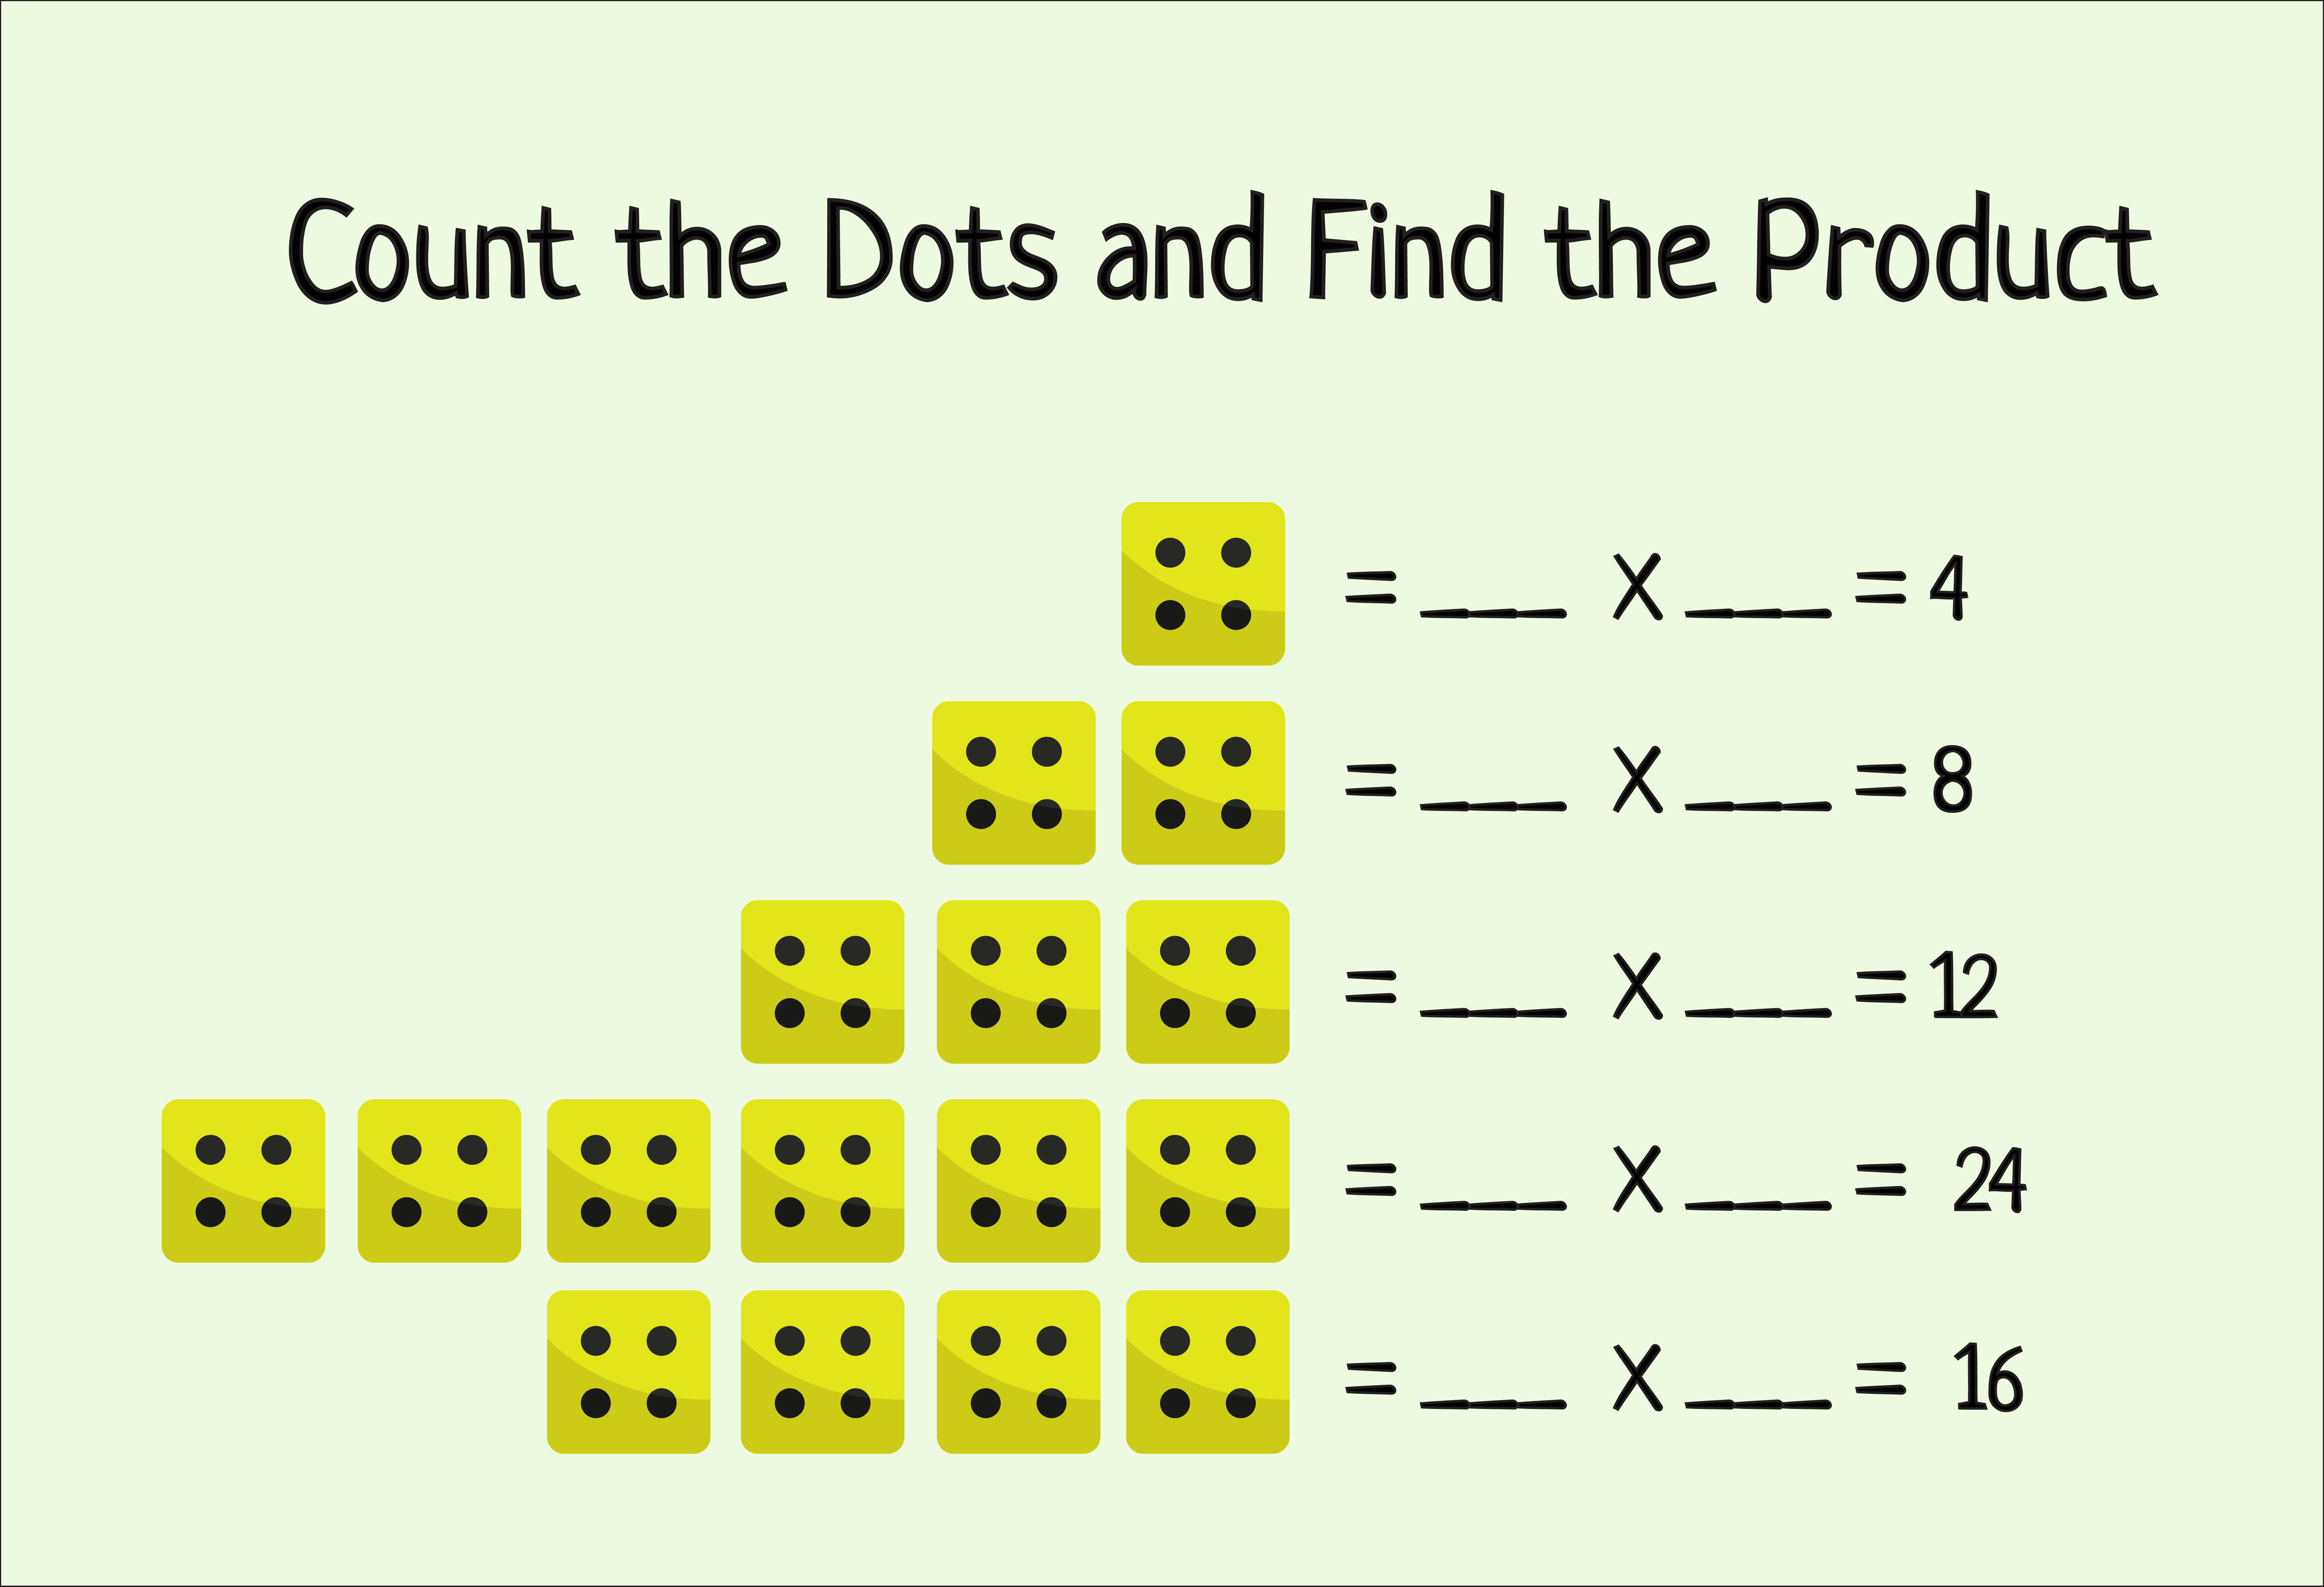 Count the dots and find the products